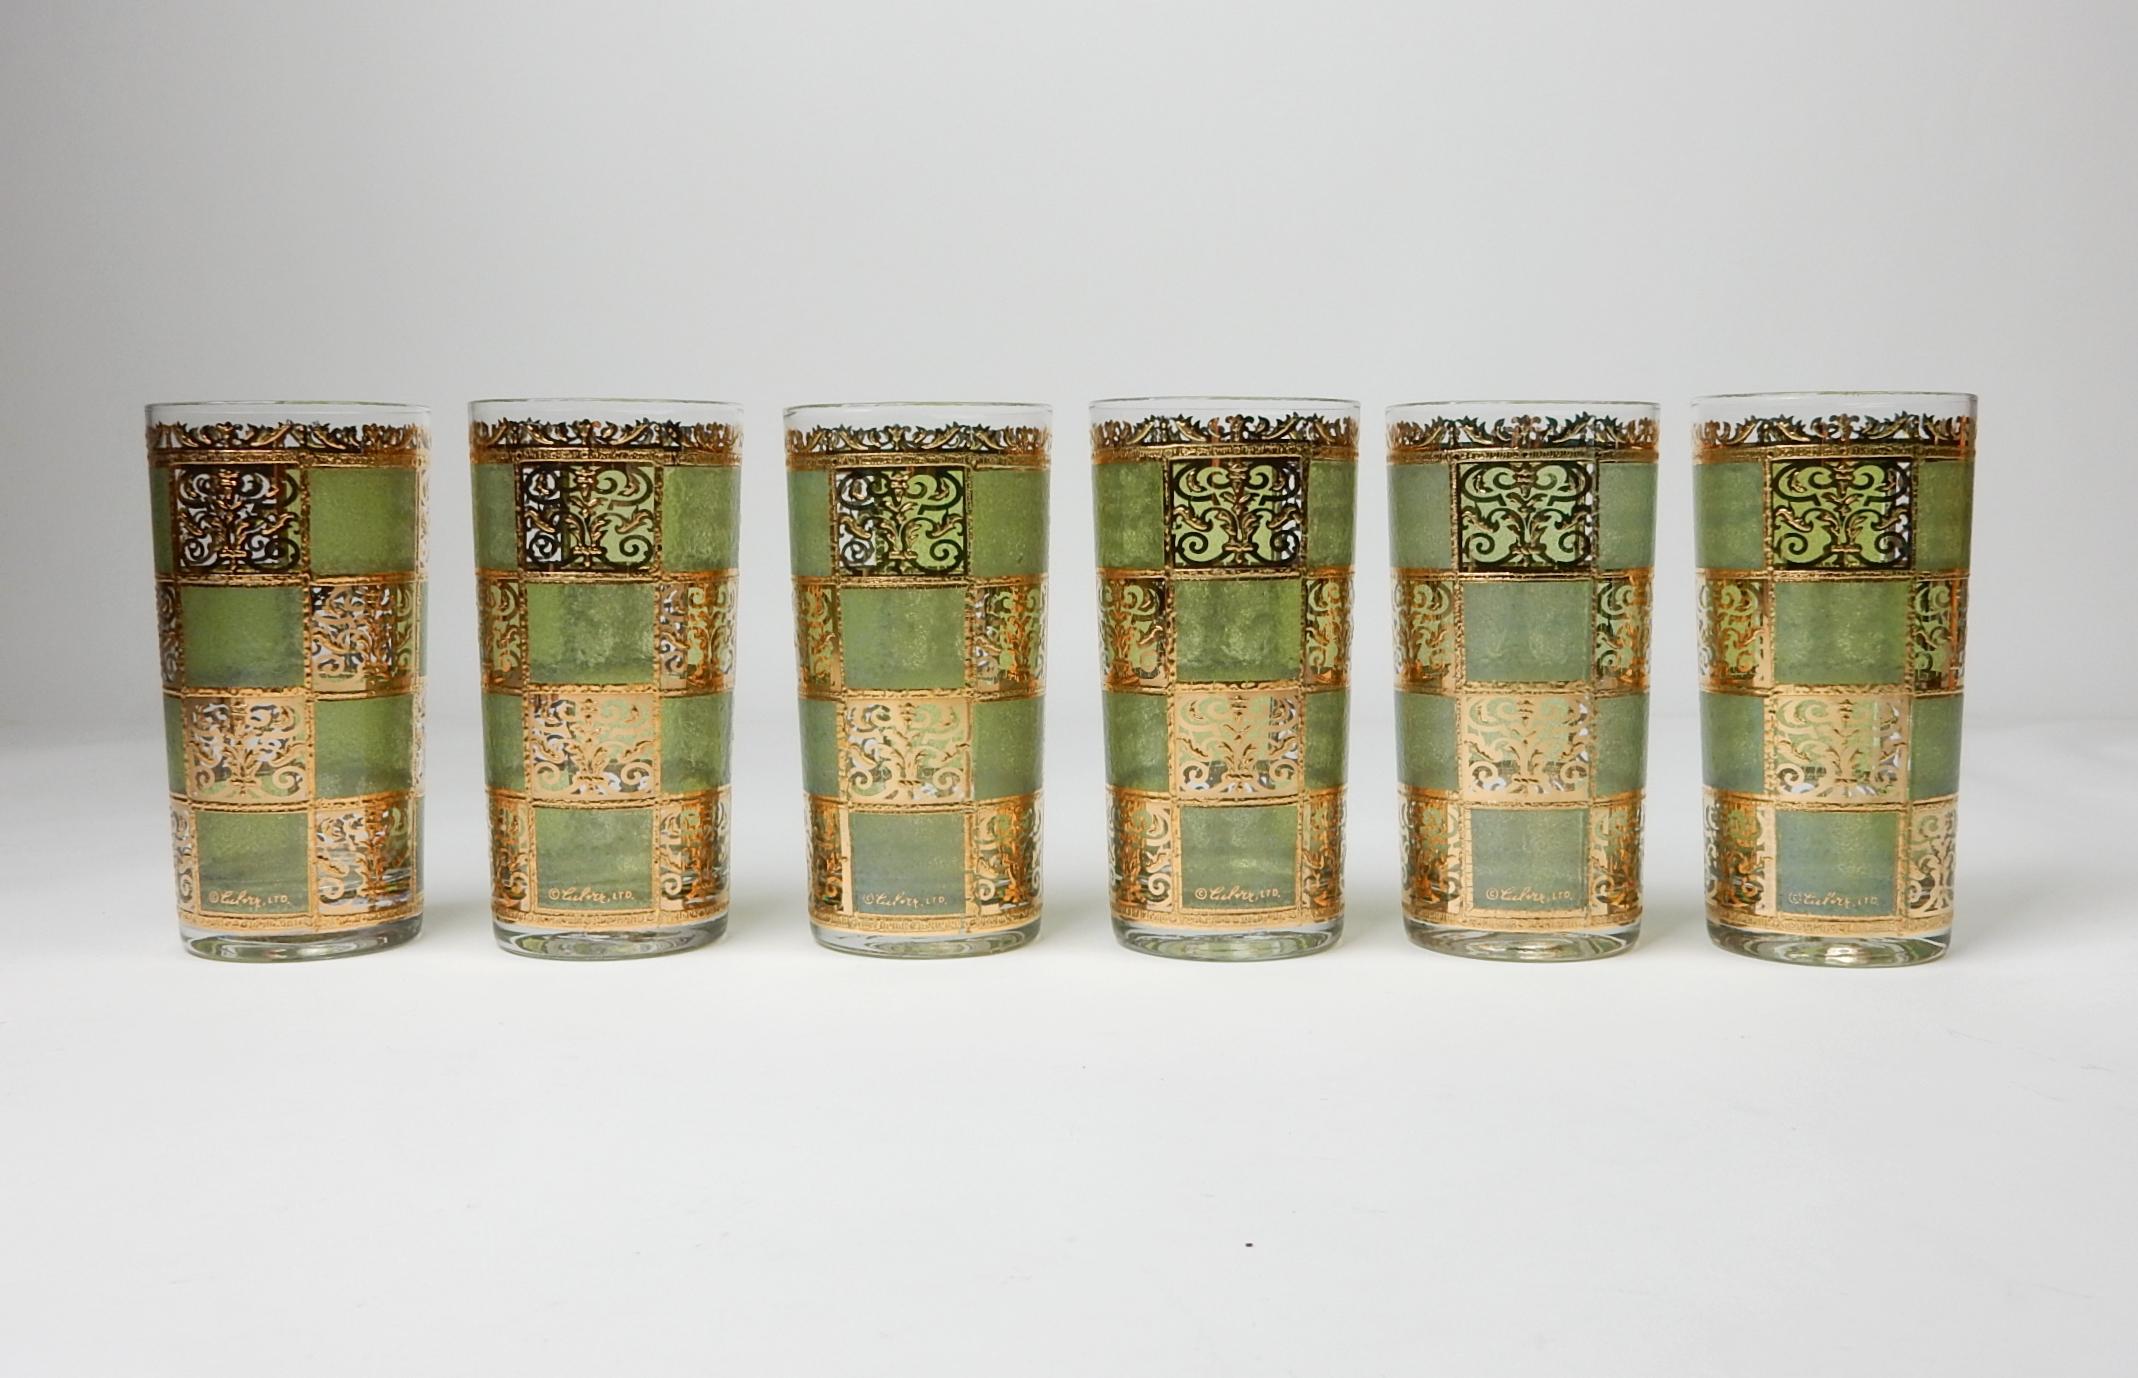 Classic set of six bar glasses from Culver ltd. ~Prado~ series.
Hi-ball size with gold foil and emerald green squares.
These are all in very good condition showing just slight use.
Careful, thoughtful packing included in your purchase.